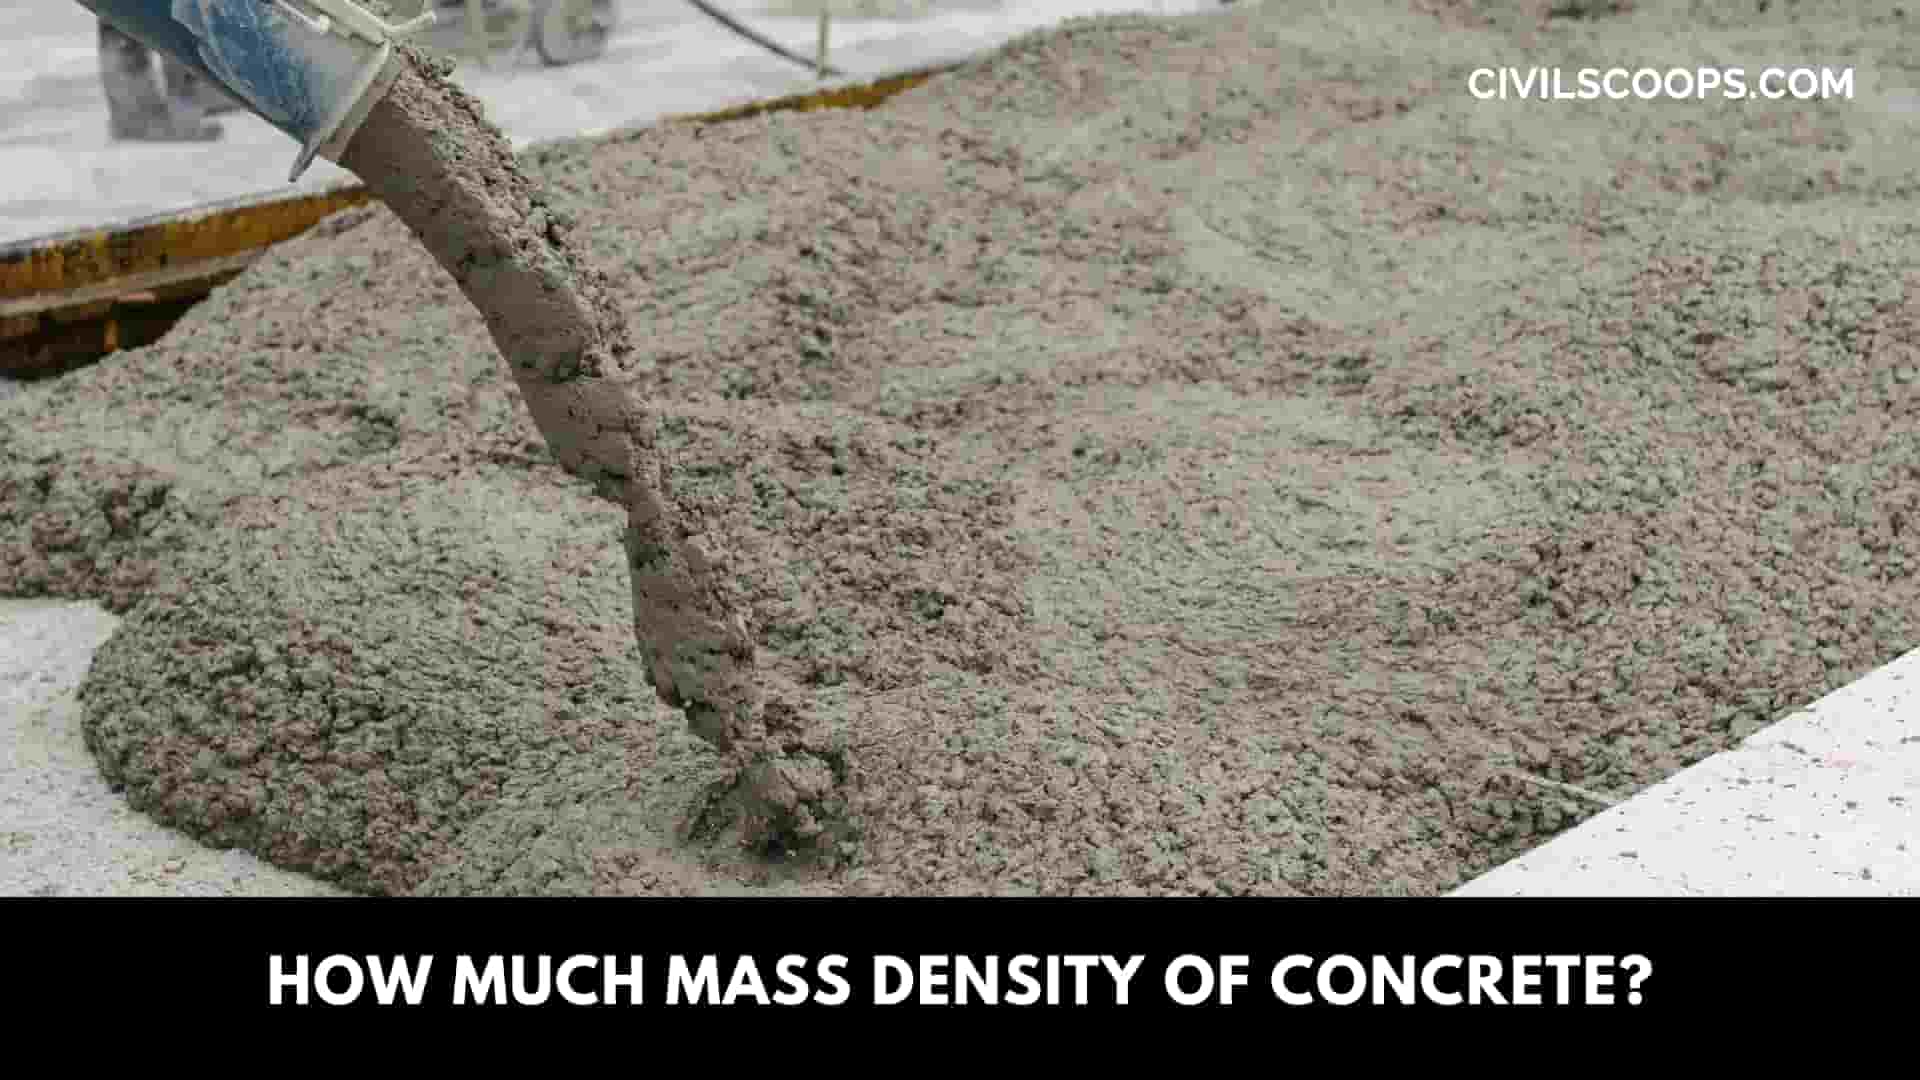 How Much Mass Density of Concrete?